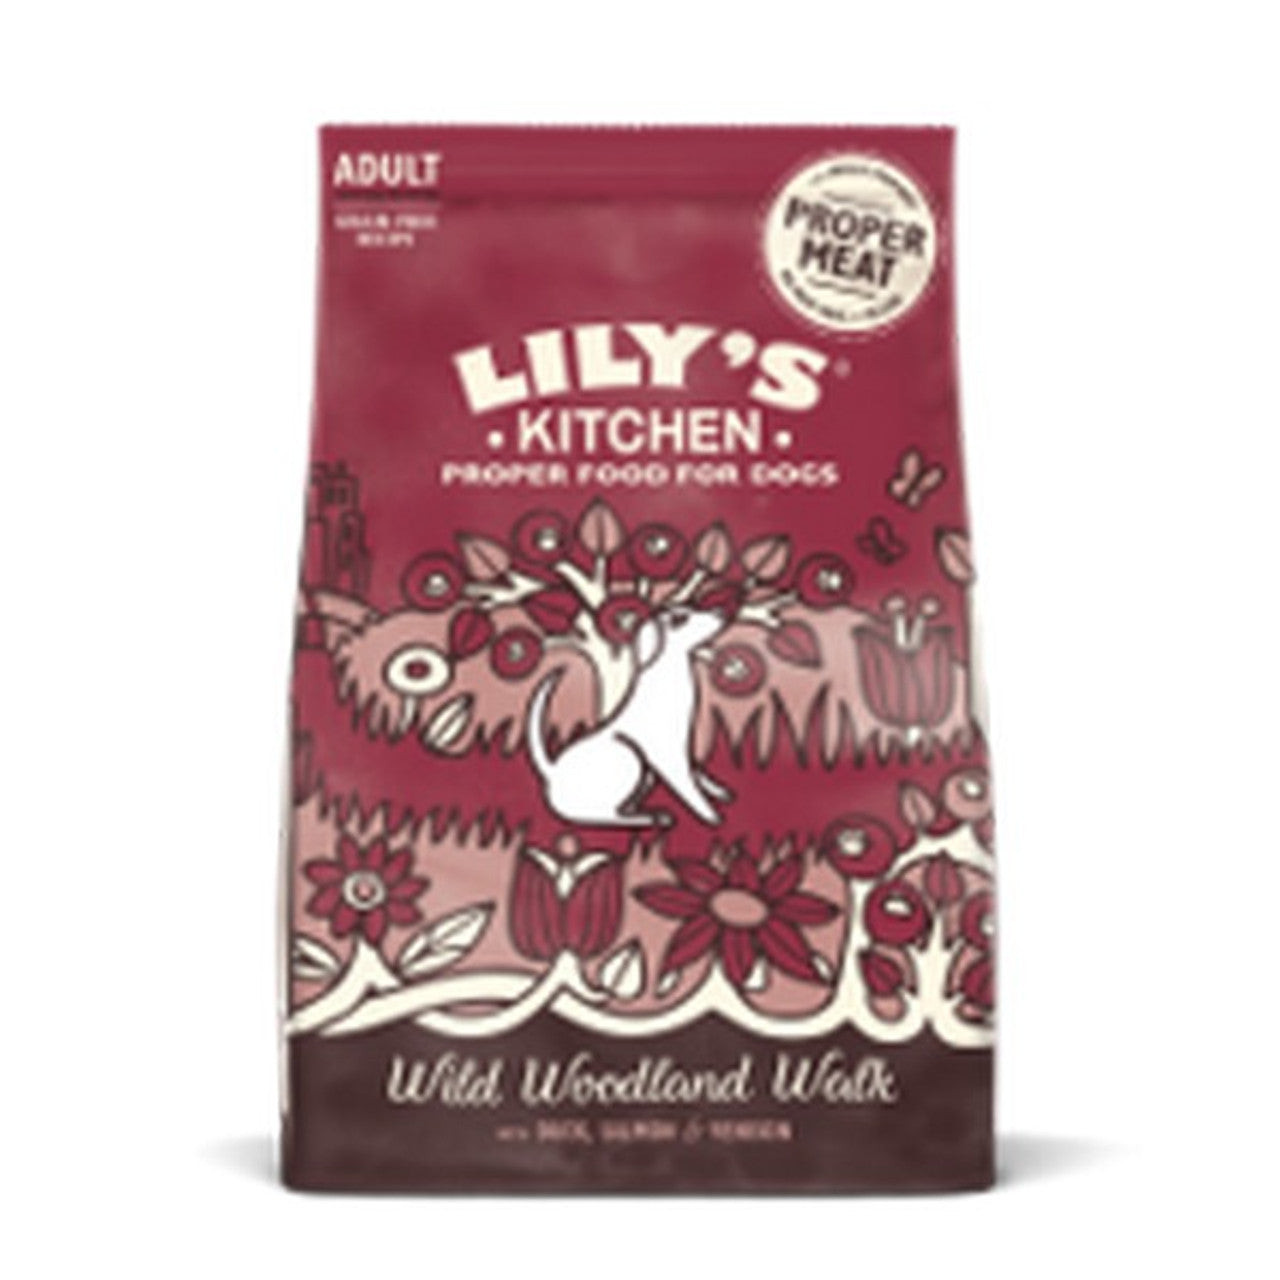 Lilys Kitchen Wild Woodland Walk with Duck Venison and Salmon Dry Dog Food 7kg